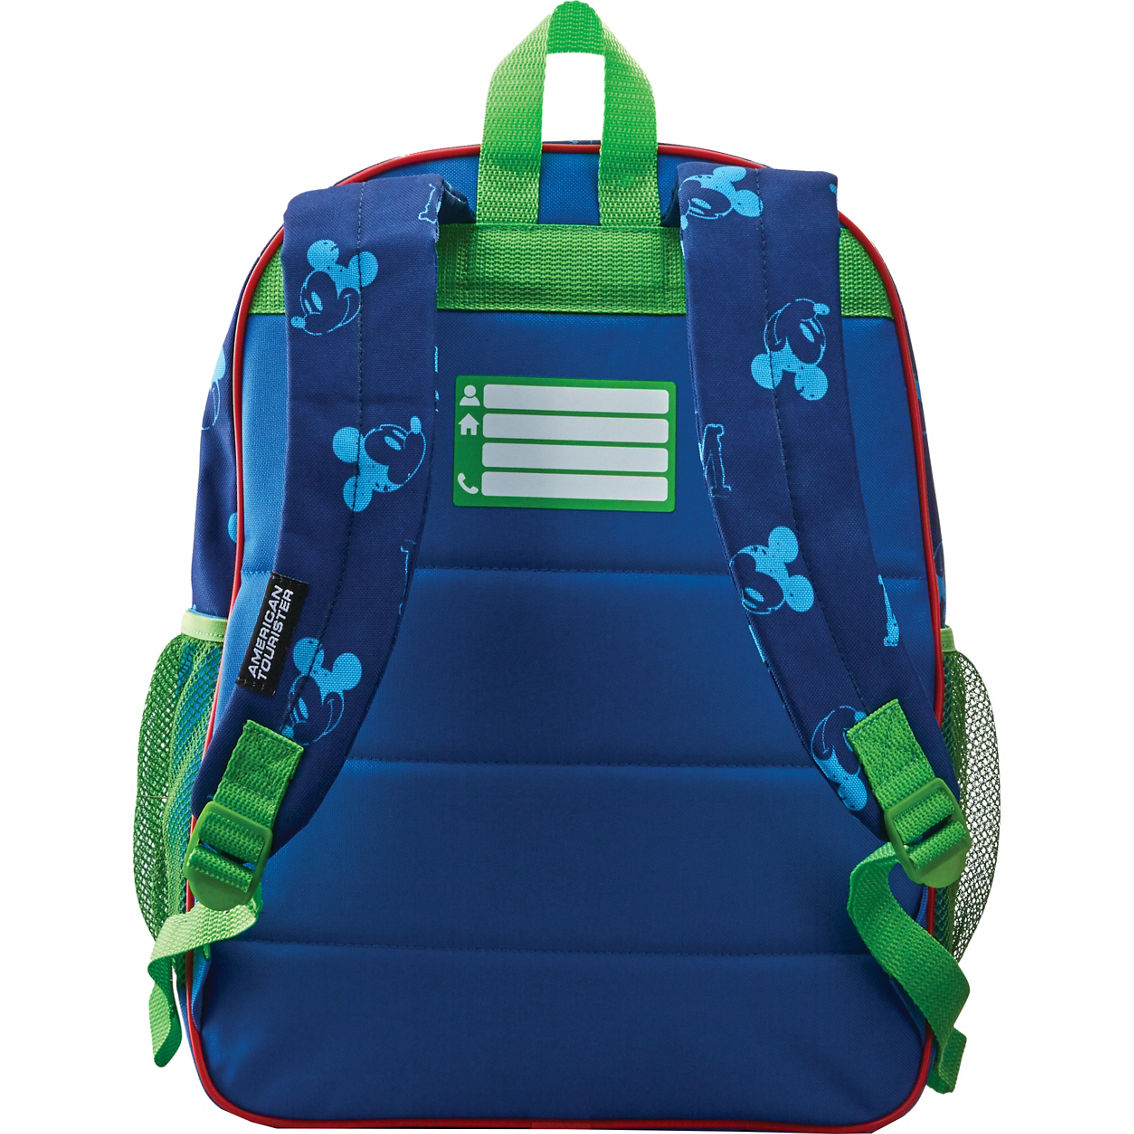 American Tourister Disney Kids Mickey Mouse Backpack - Image 2 of 6